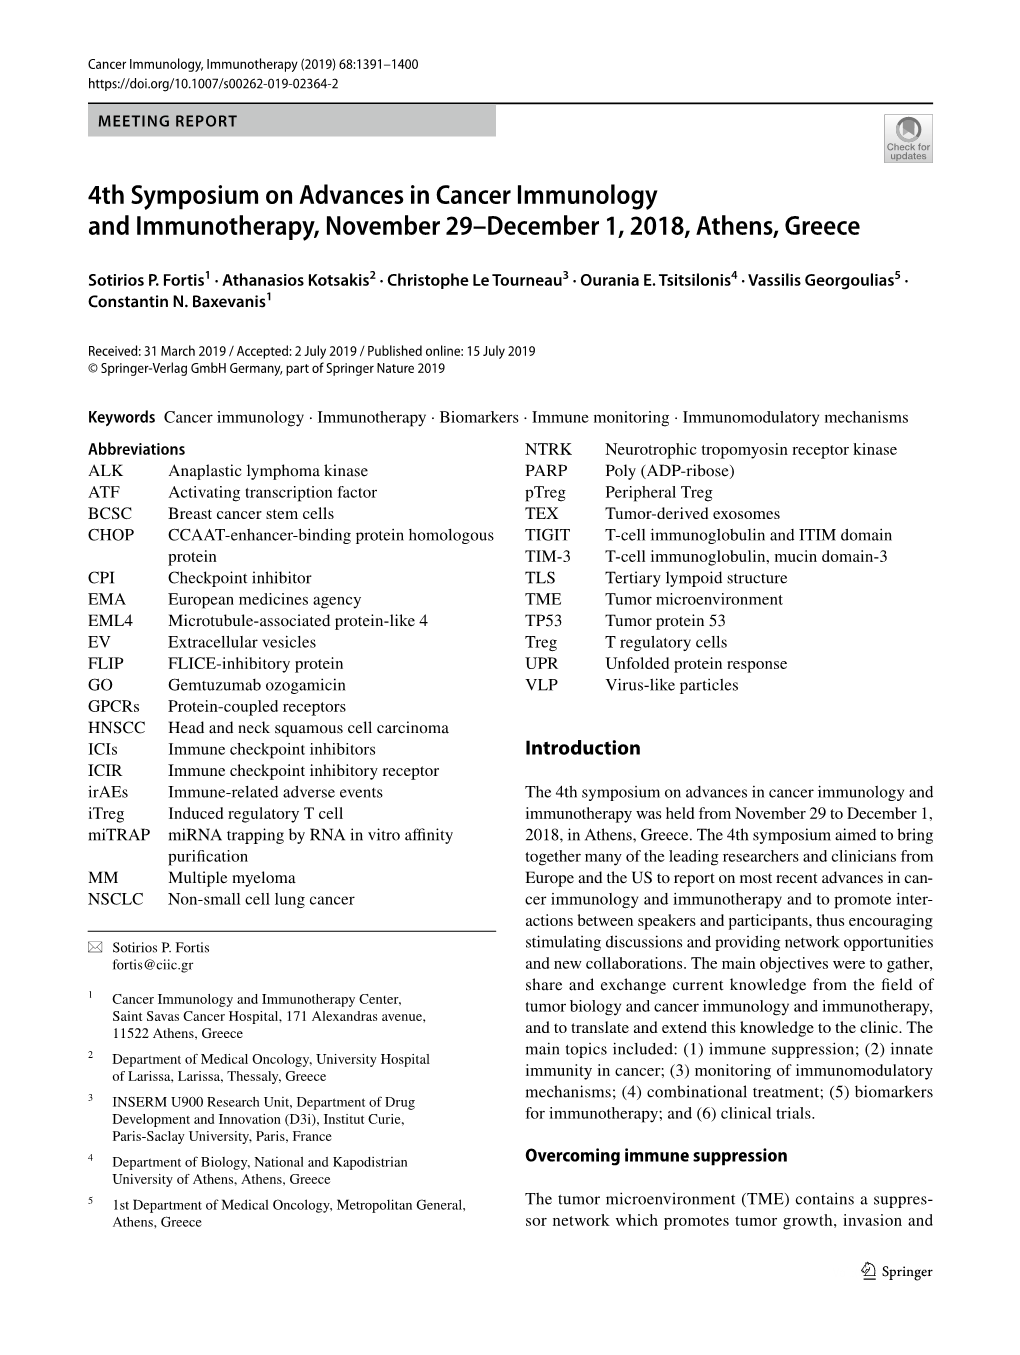 4Th Symposium on Advances in Cancer Immunology and Immunotherapy, November 29–December 1, 2018, Athens, Greece